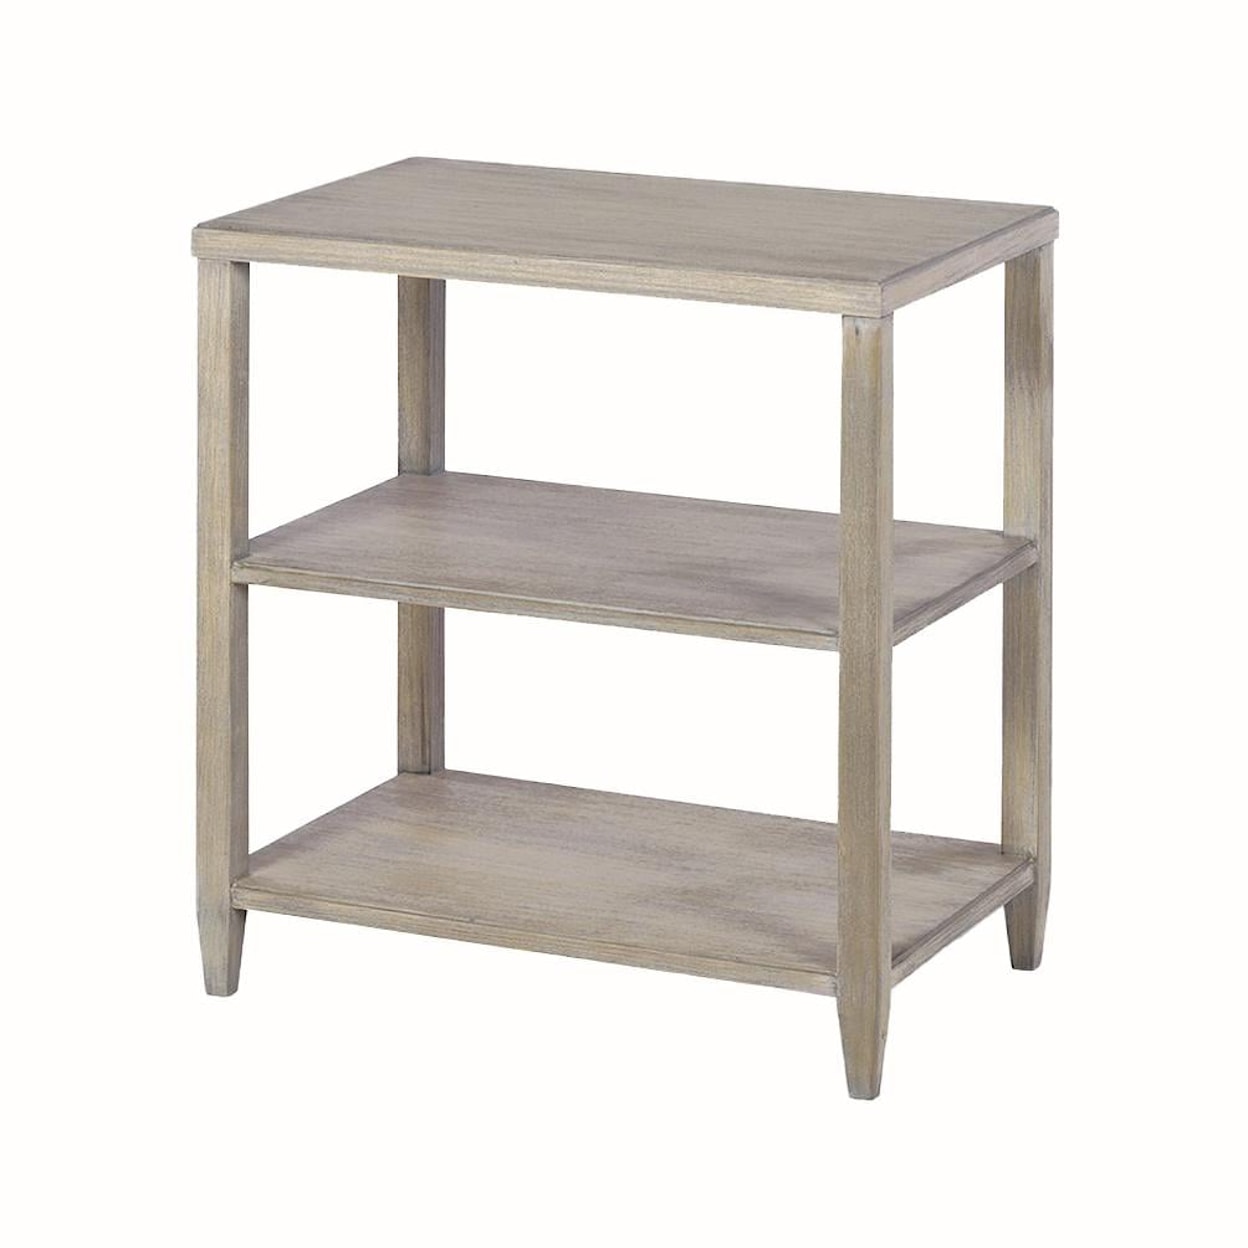 Oliver Home Furnishings End/ Side Tables RECTANGLE TIERED END TABLE-RABBIT